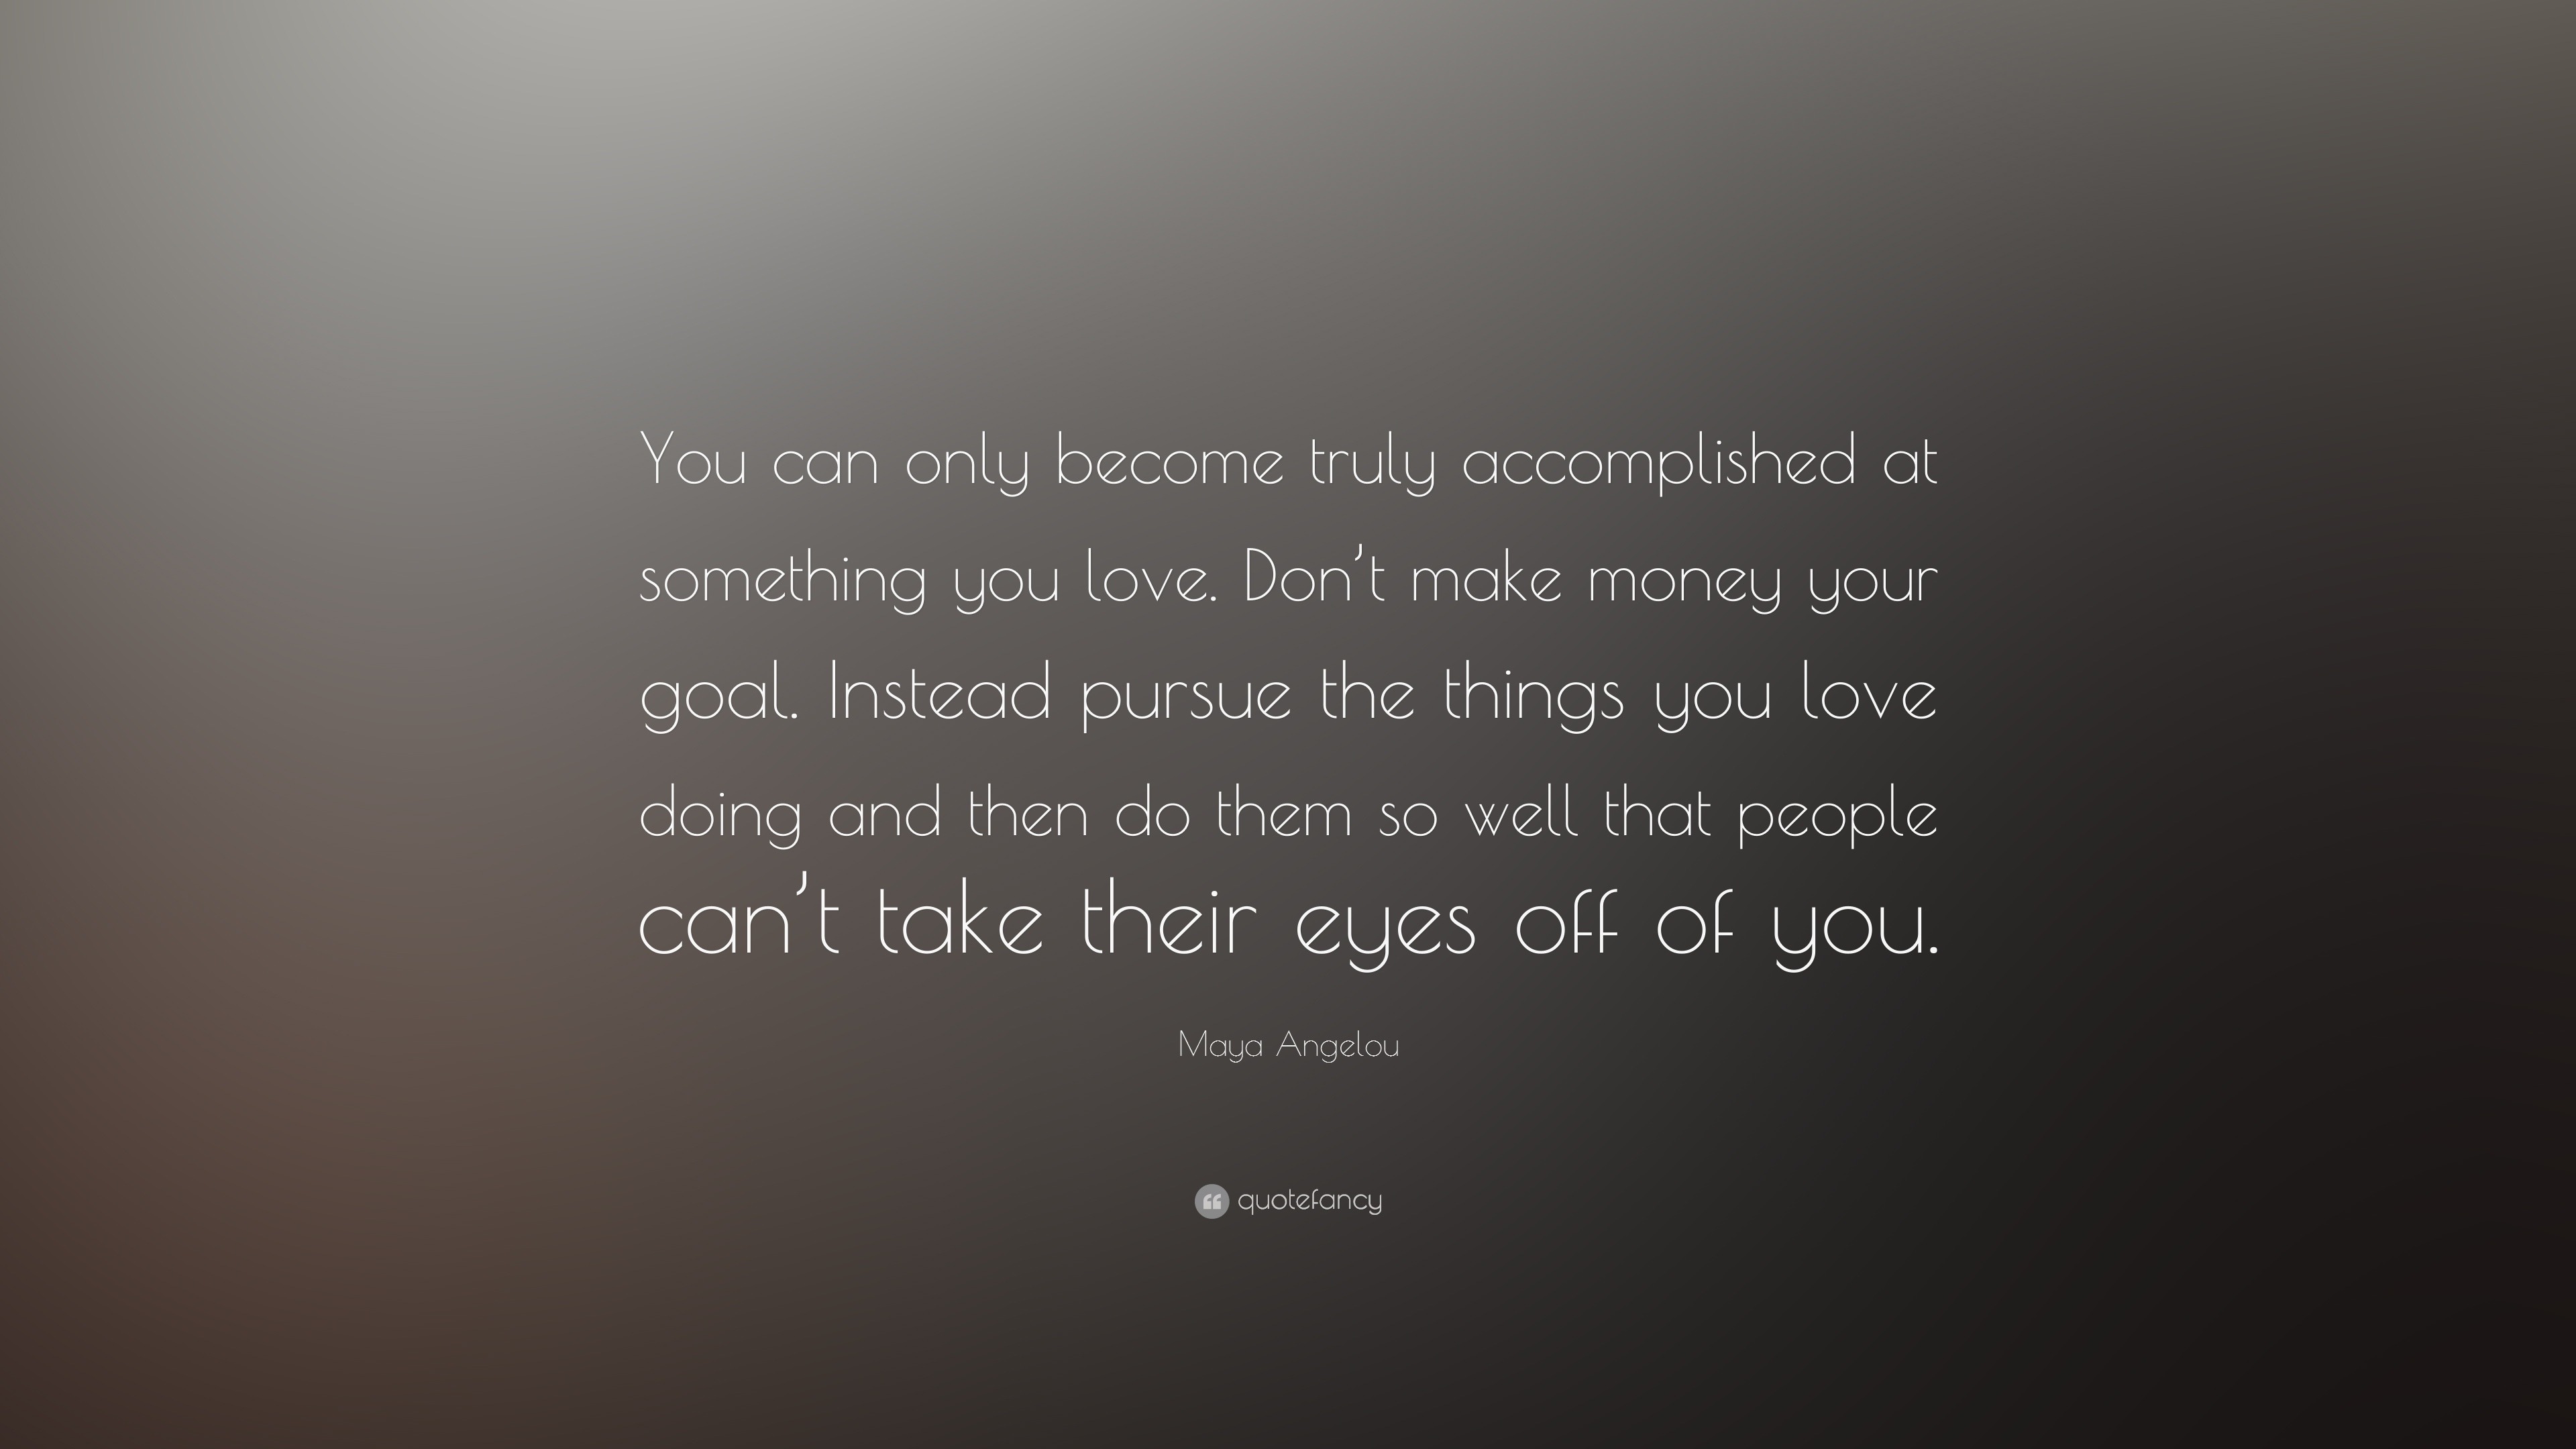 Maya Angelou Quote “You can only be e truly ac plished at something you love